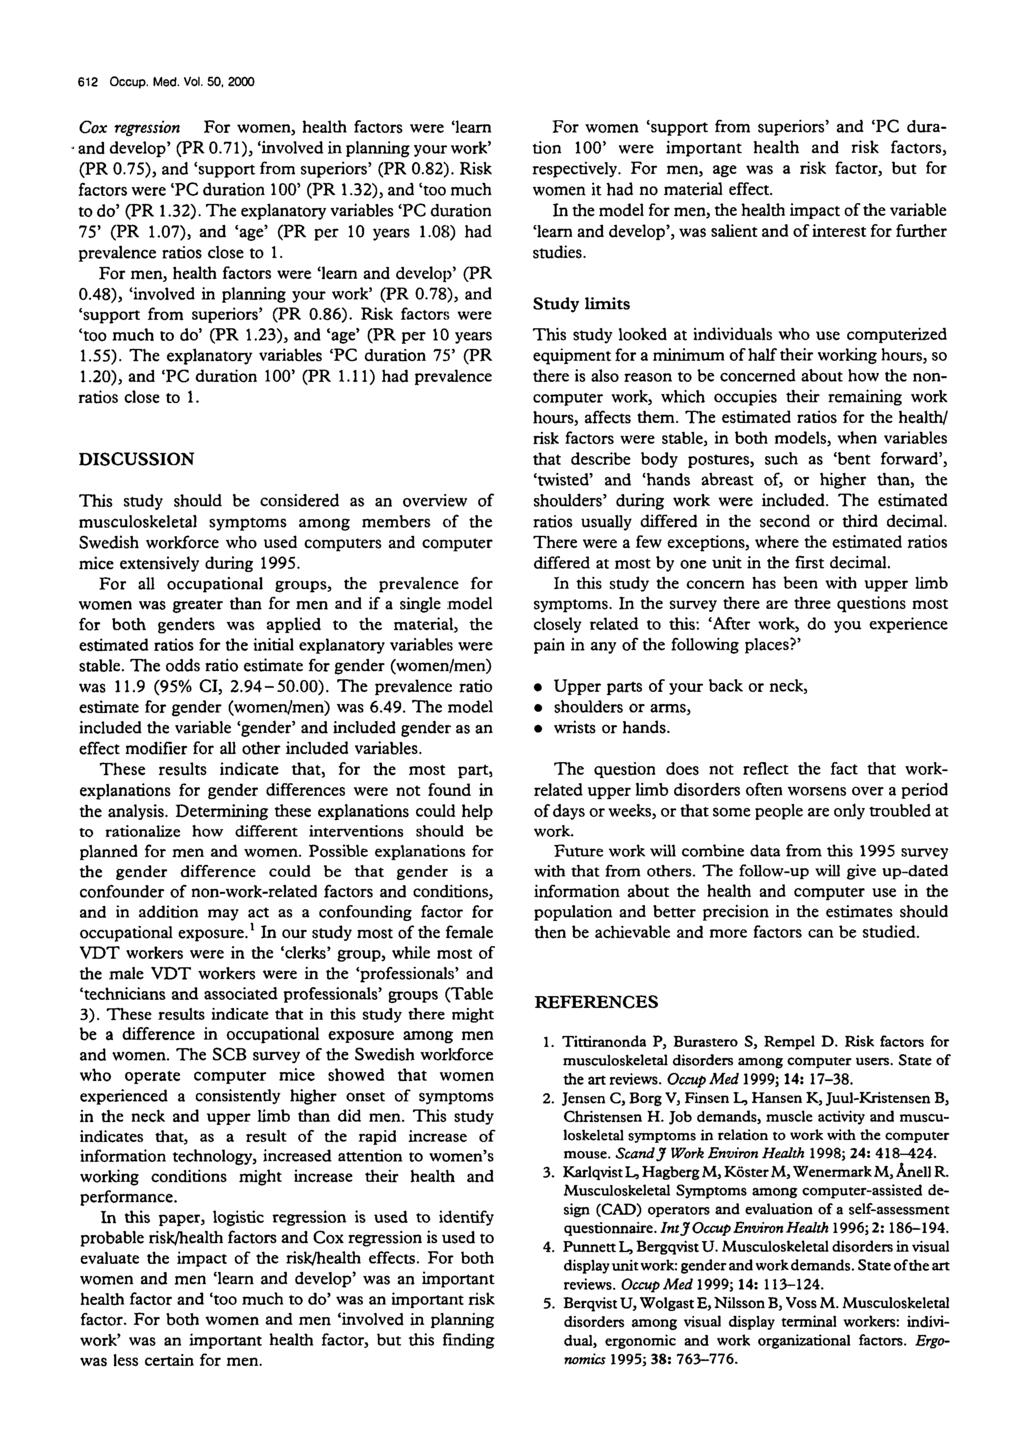 612 Occup. Med. Vol. 50, 2000 Cox regression For women, health factors were 'learn and develop' (PR 0.71), 'involved in planning your work' (PR 0.75), and 'support from superiors' (PR 0.82).